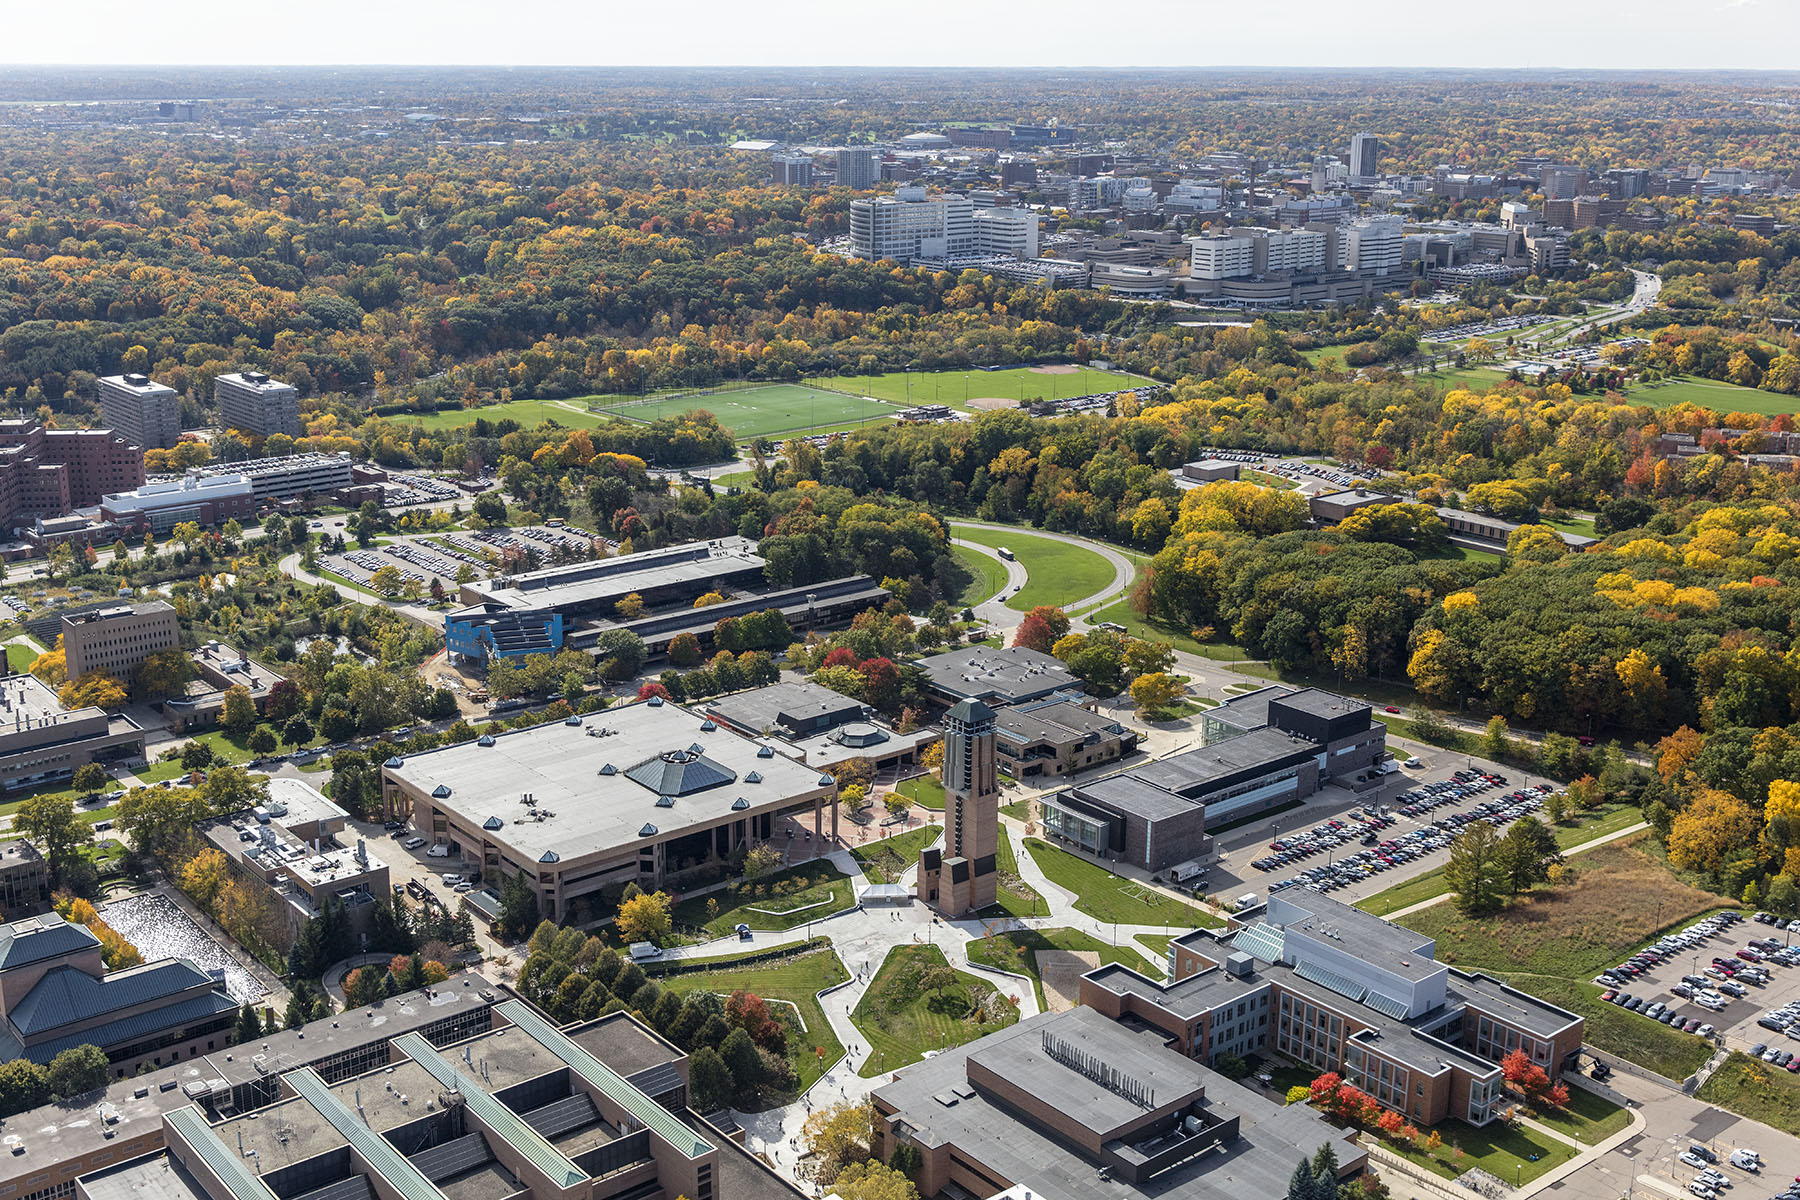 Aerial view of the University of Michigan campus